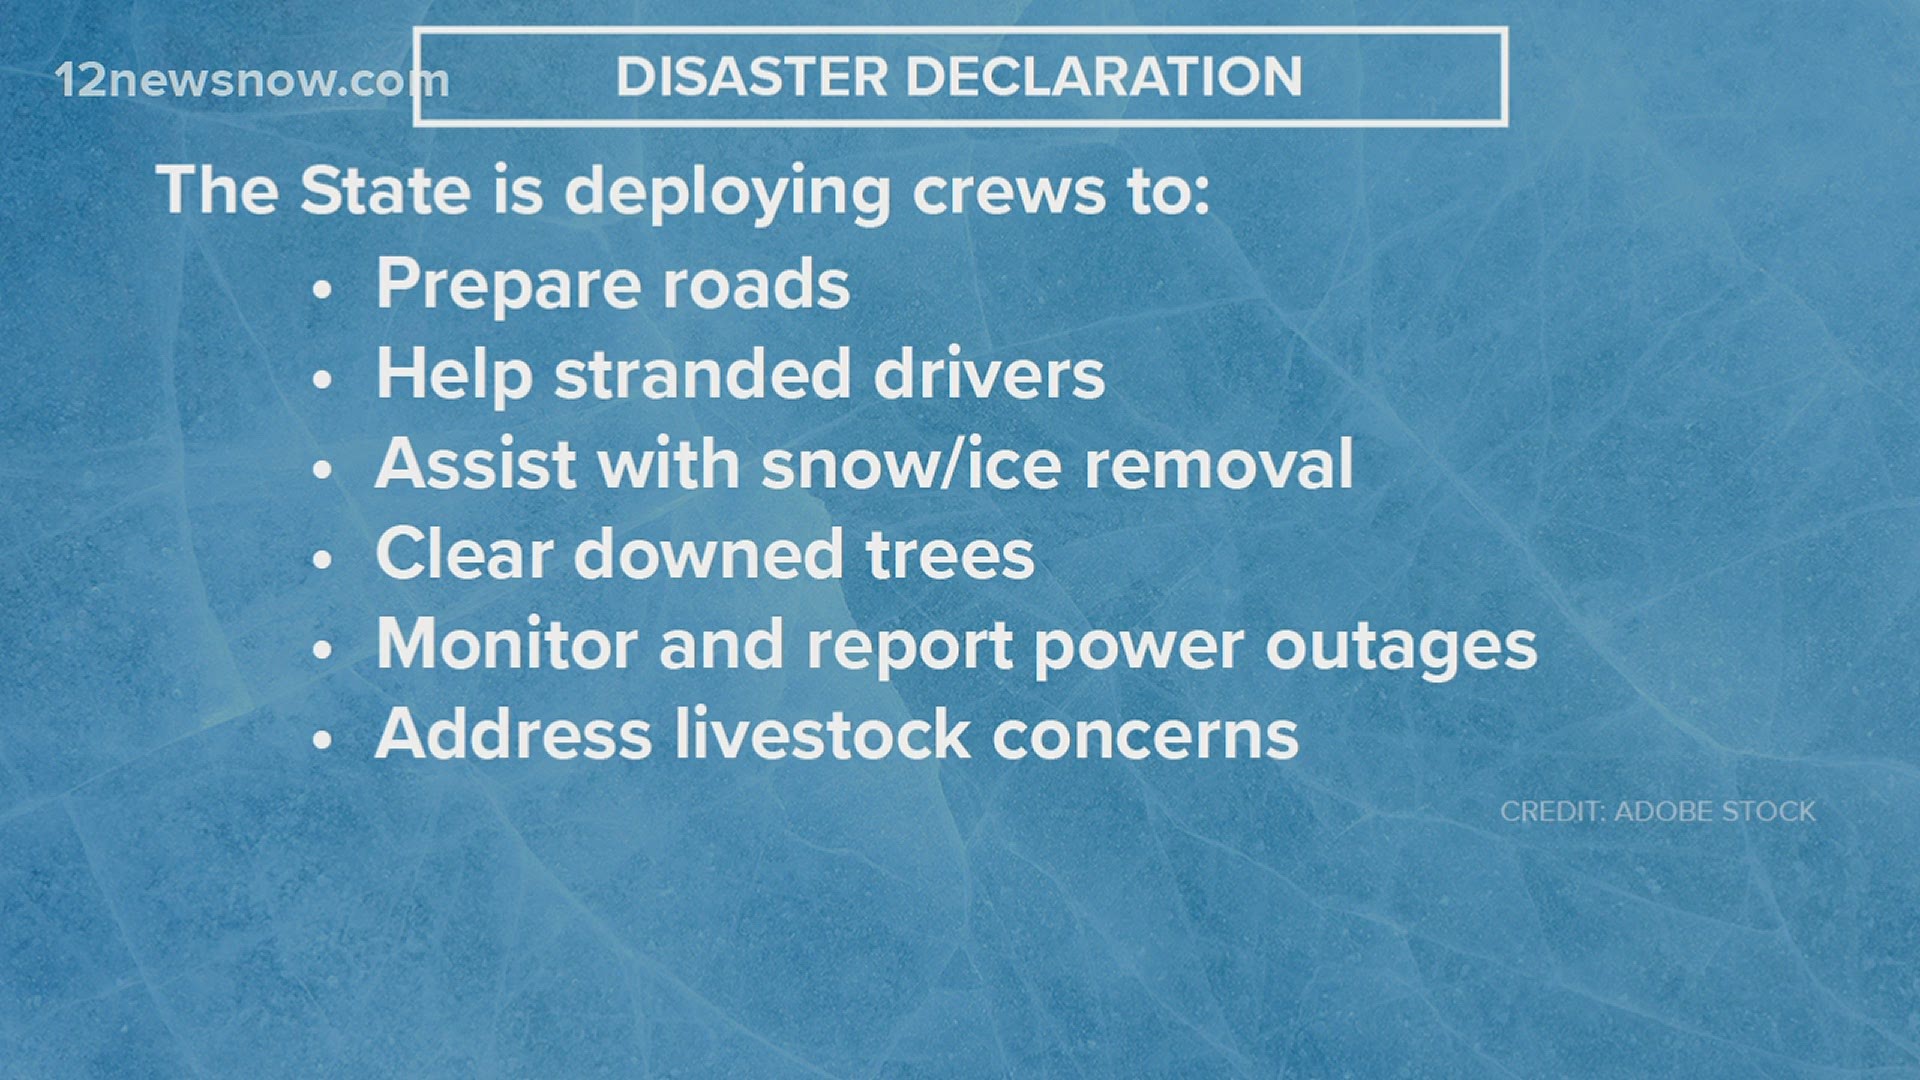 Governor Greg Abbott has issued a disaster declaration for all 254 counties ahead of a winter weather warning.